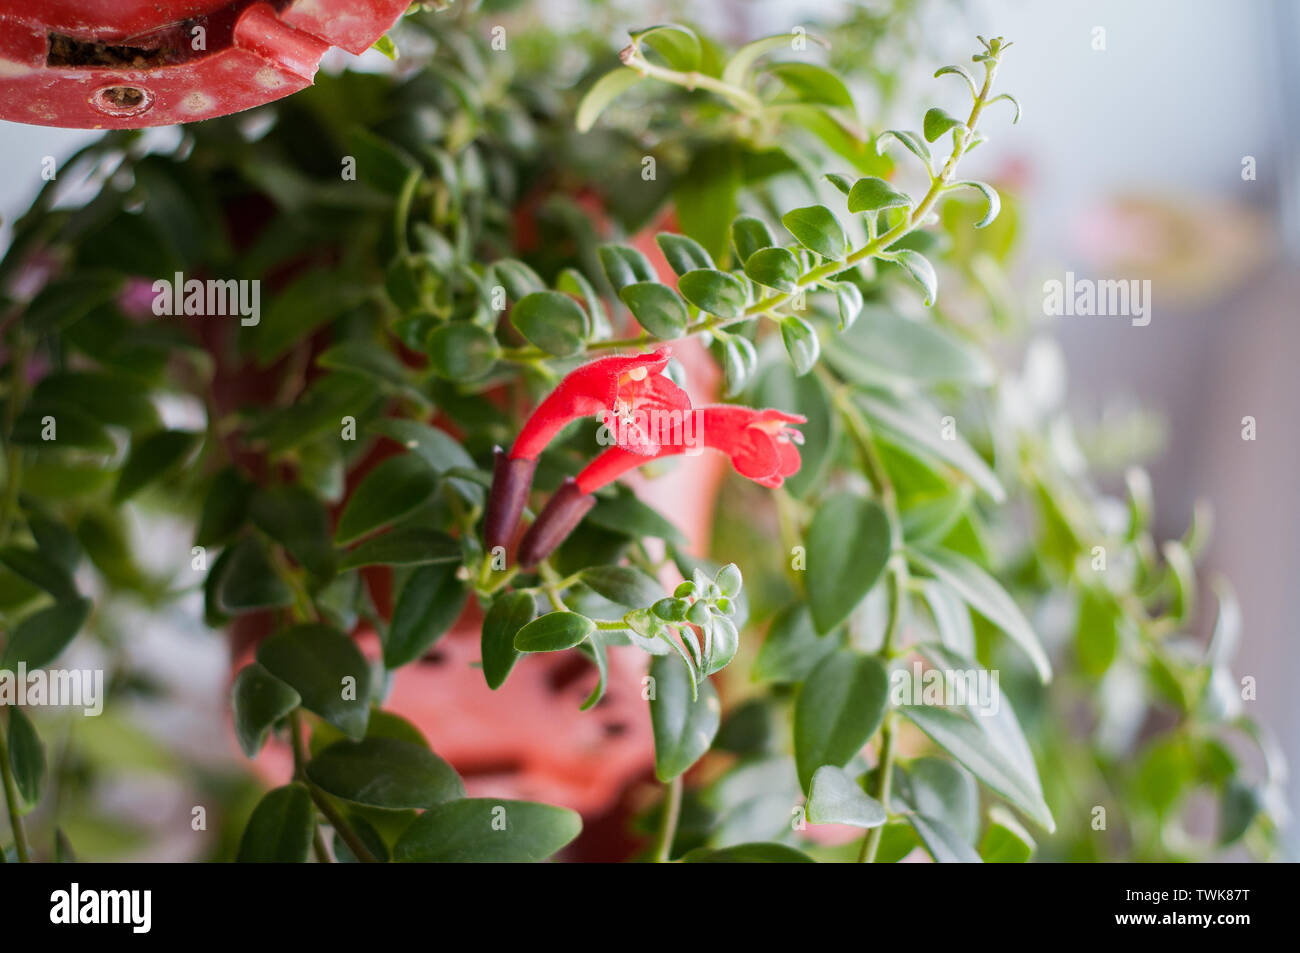 Aeschynanthus  also known as Lipstick Plant. Aeschynanthus is a genus of about 150 species of evergreen subtropical plants in the family Gesneriaceae. Stock Photo